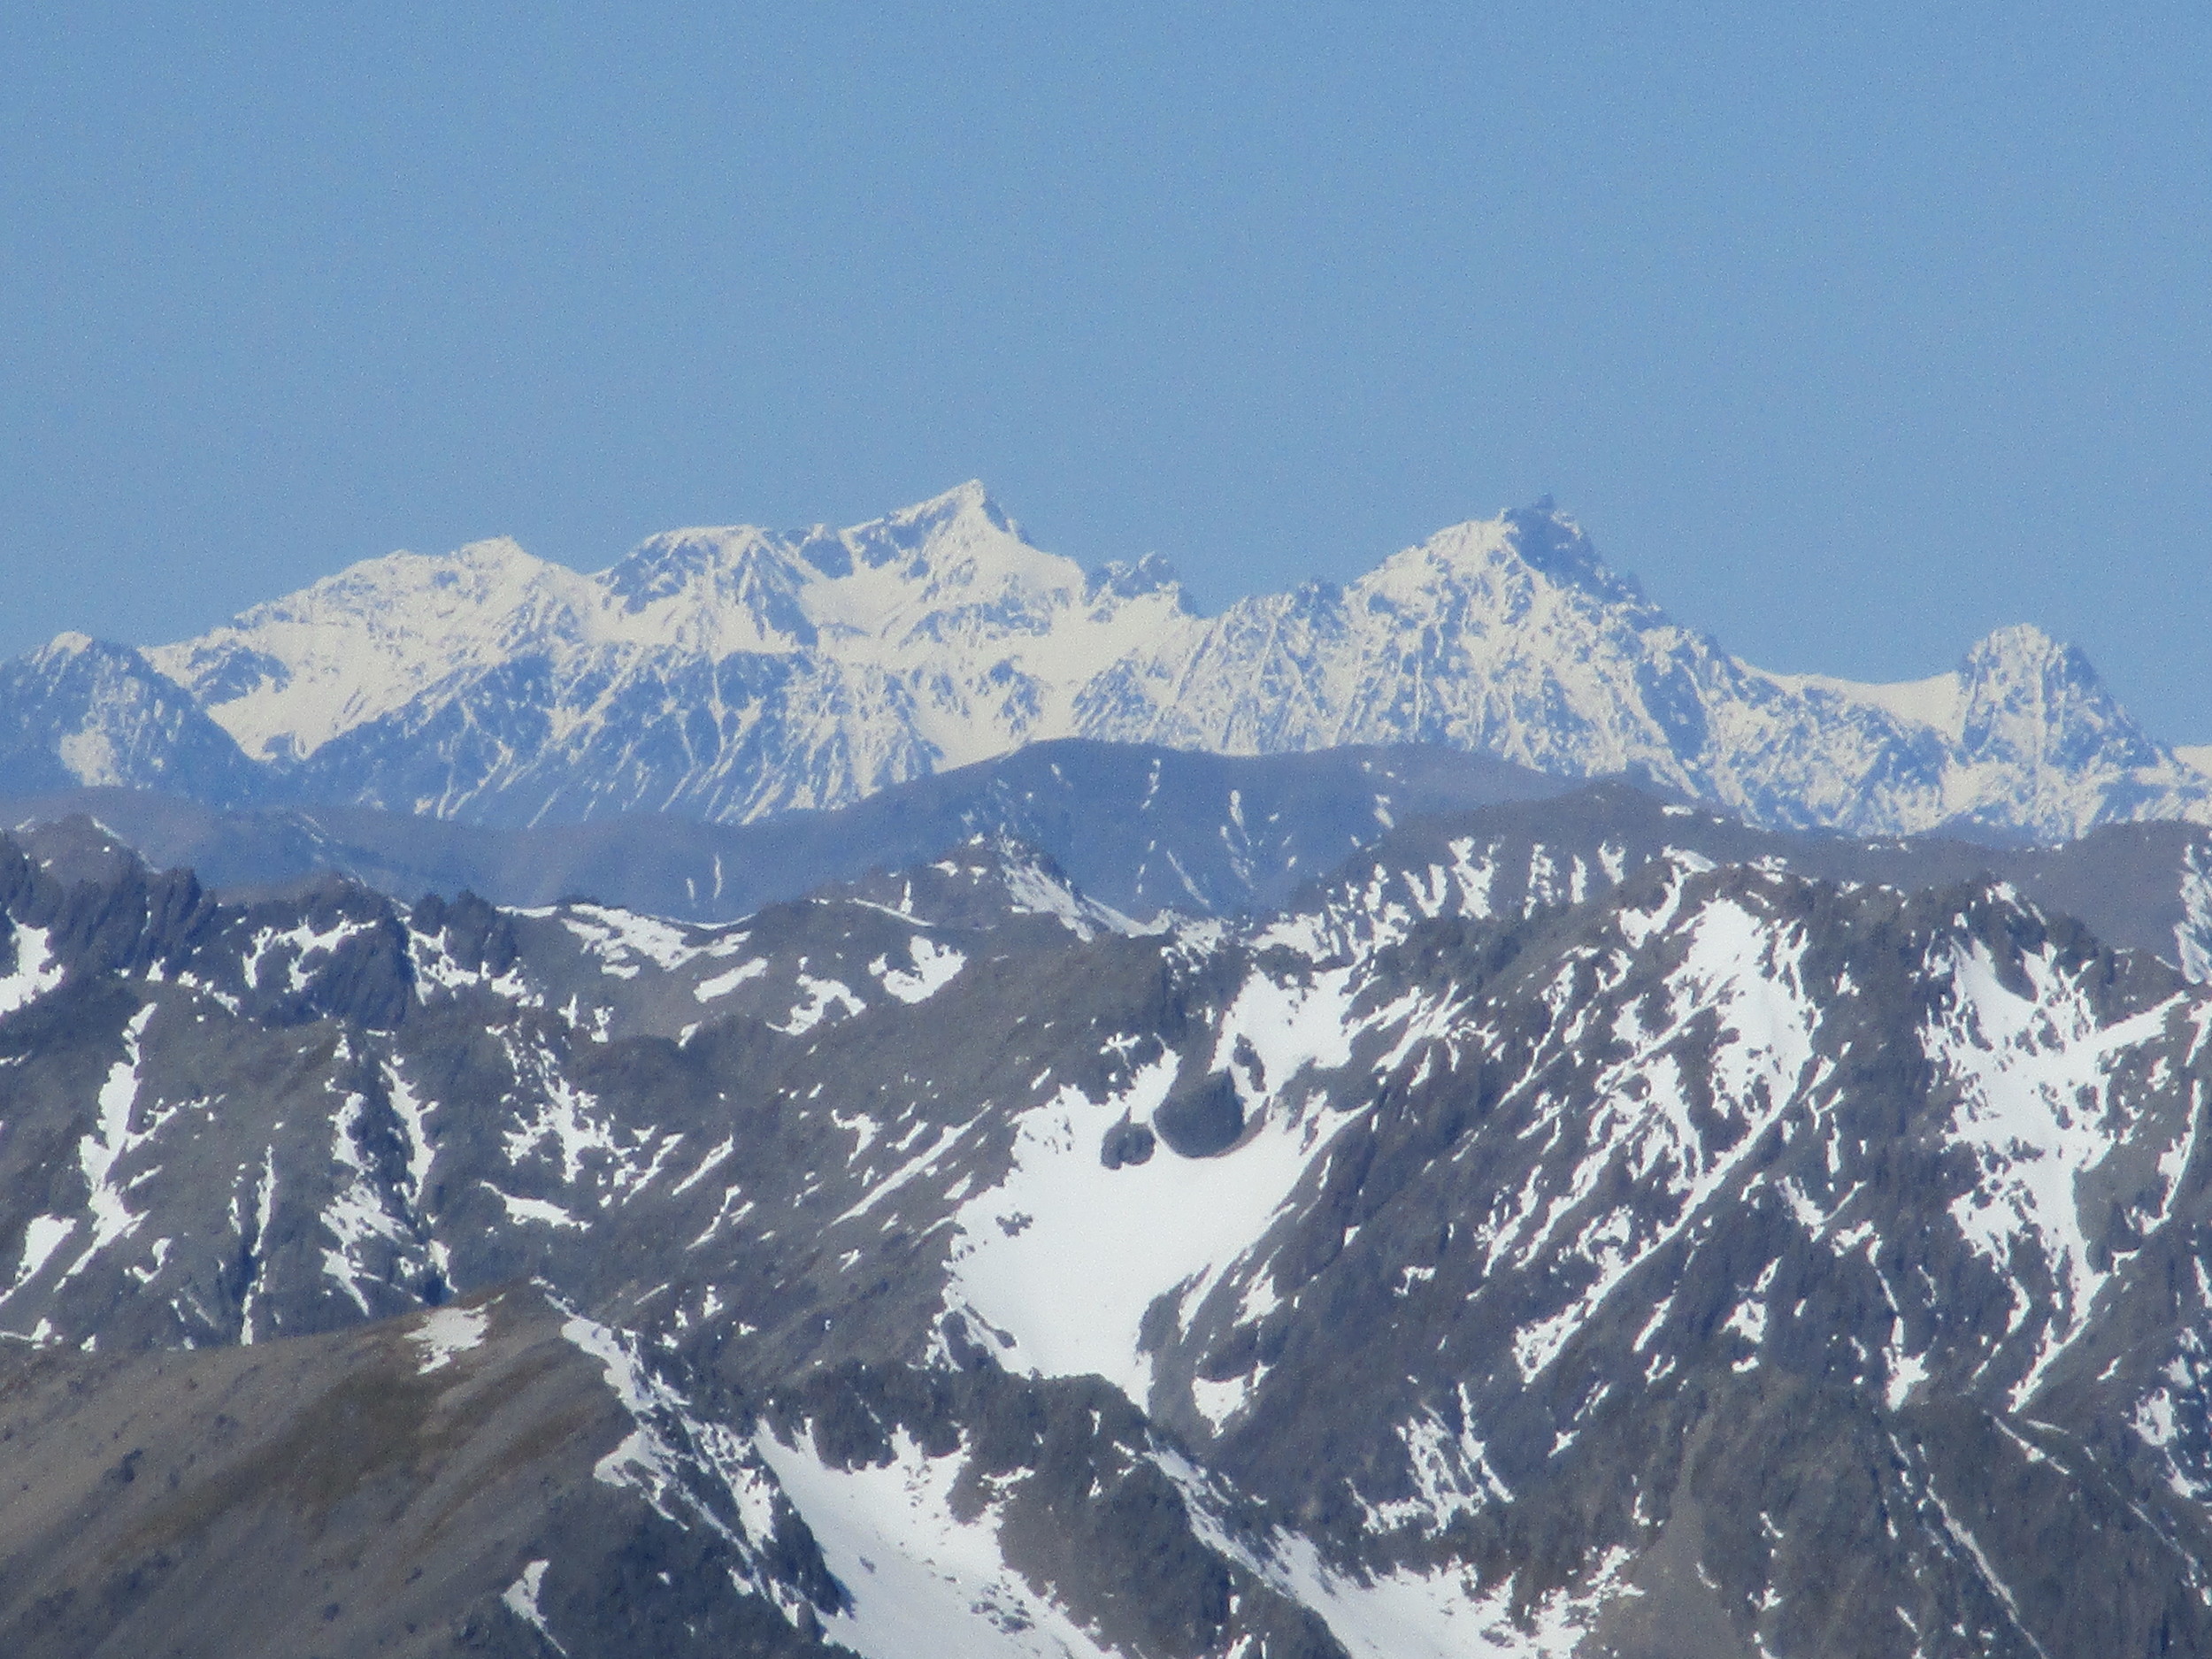   &nbsp;Tapuae-o-Uenuku 2899 m - Mount Alarm 2879 m and Mitre 2621m as seen from &nbsp;Mount Chittenden Oct 2015  